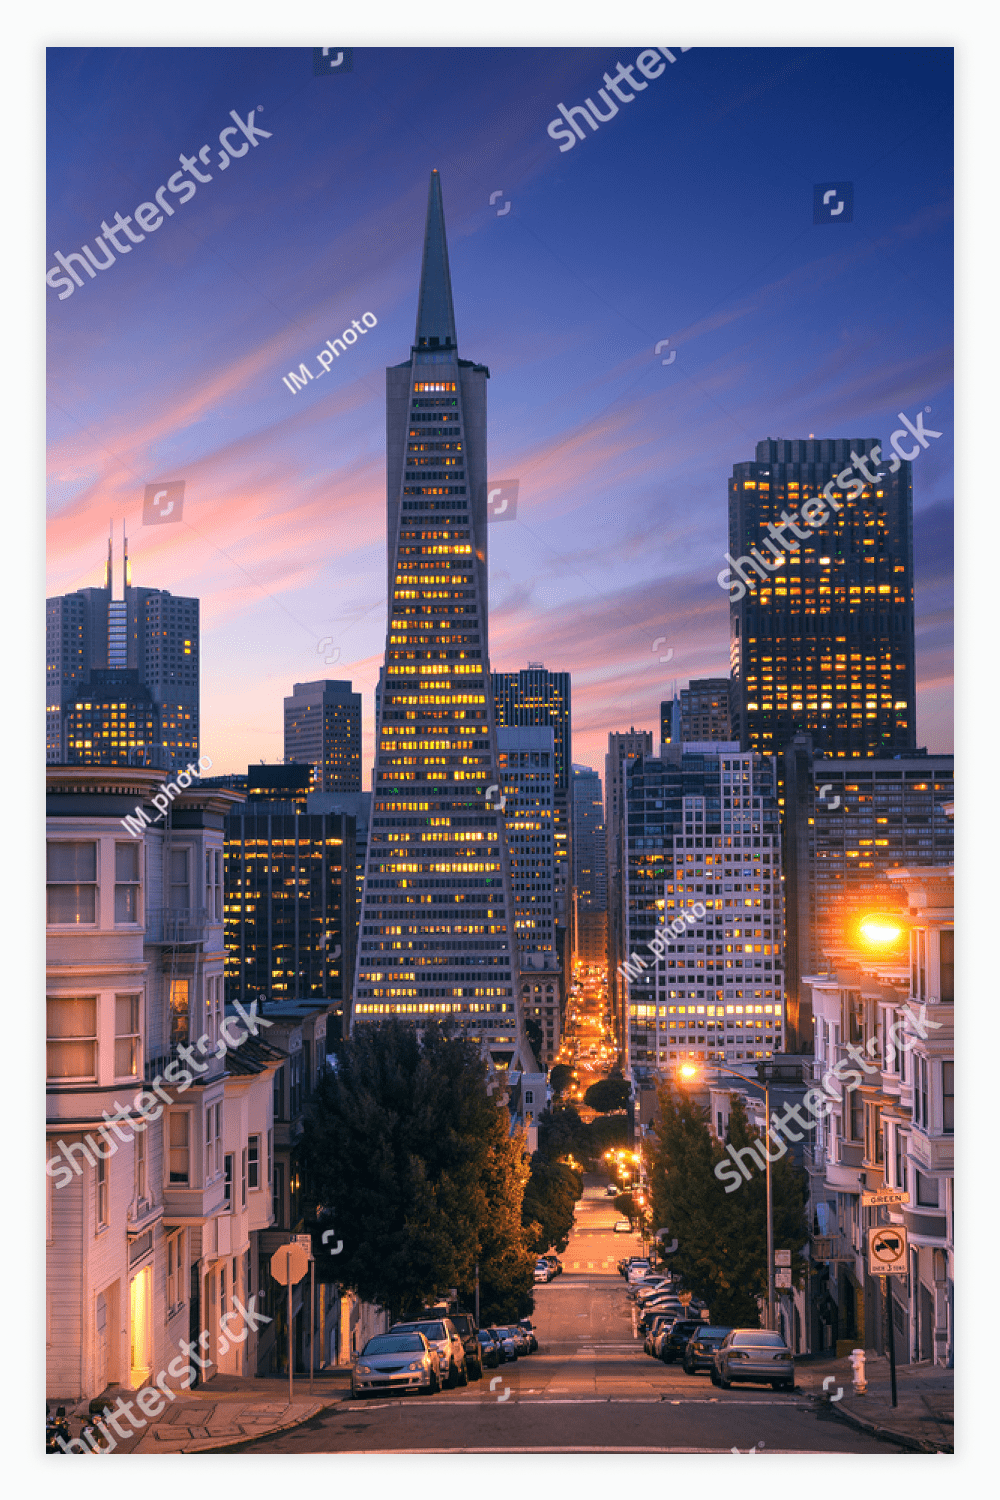 San Francisco downtown at sunrise - night. Famous typical buildings in front.